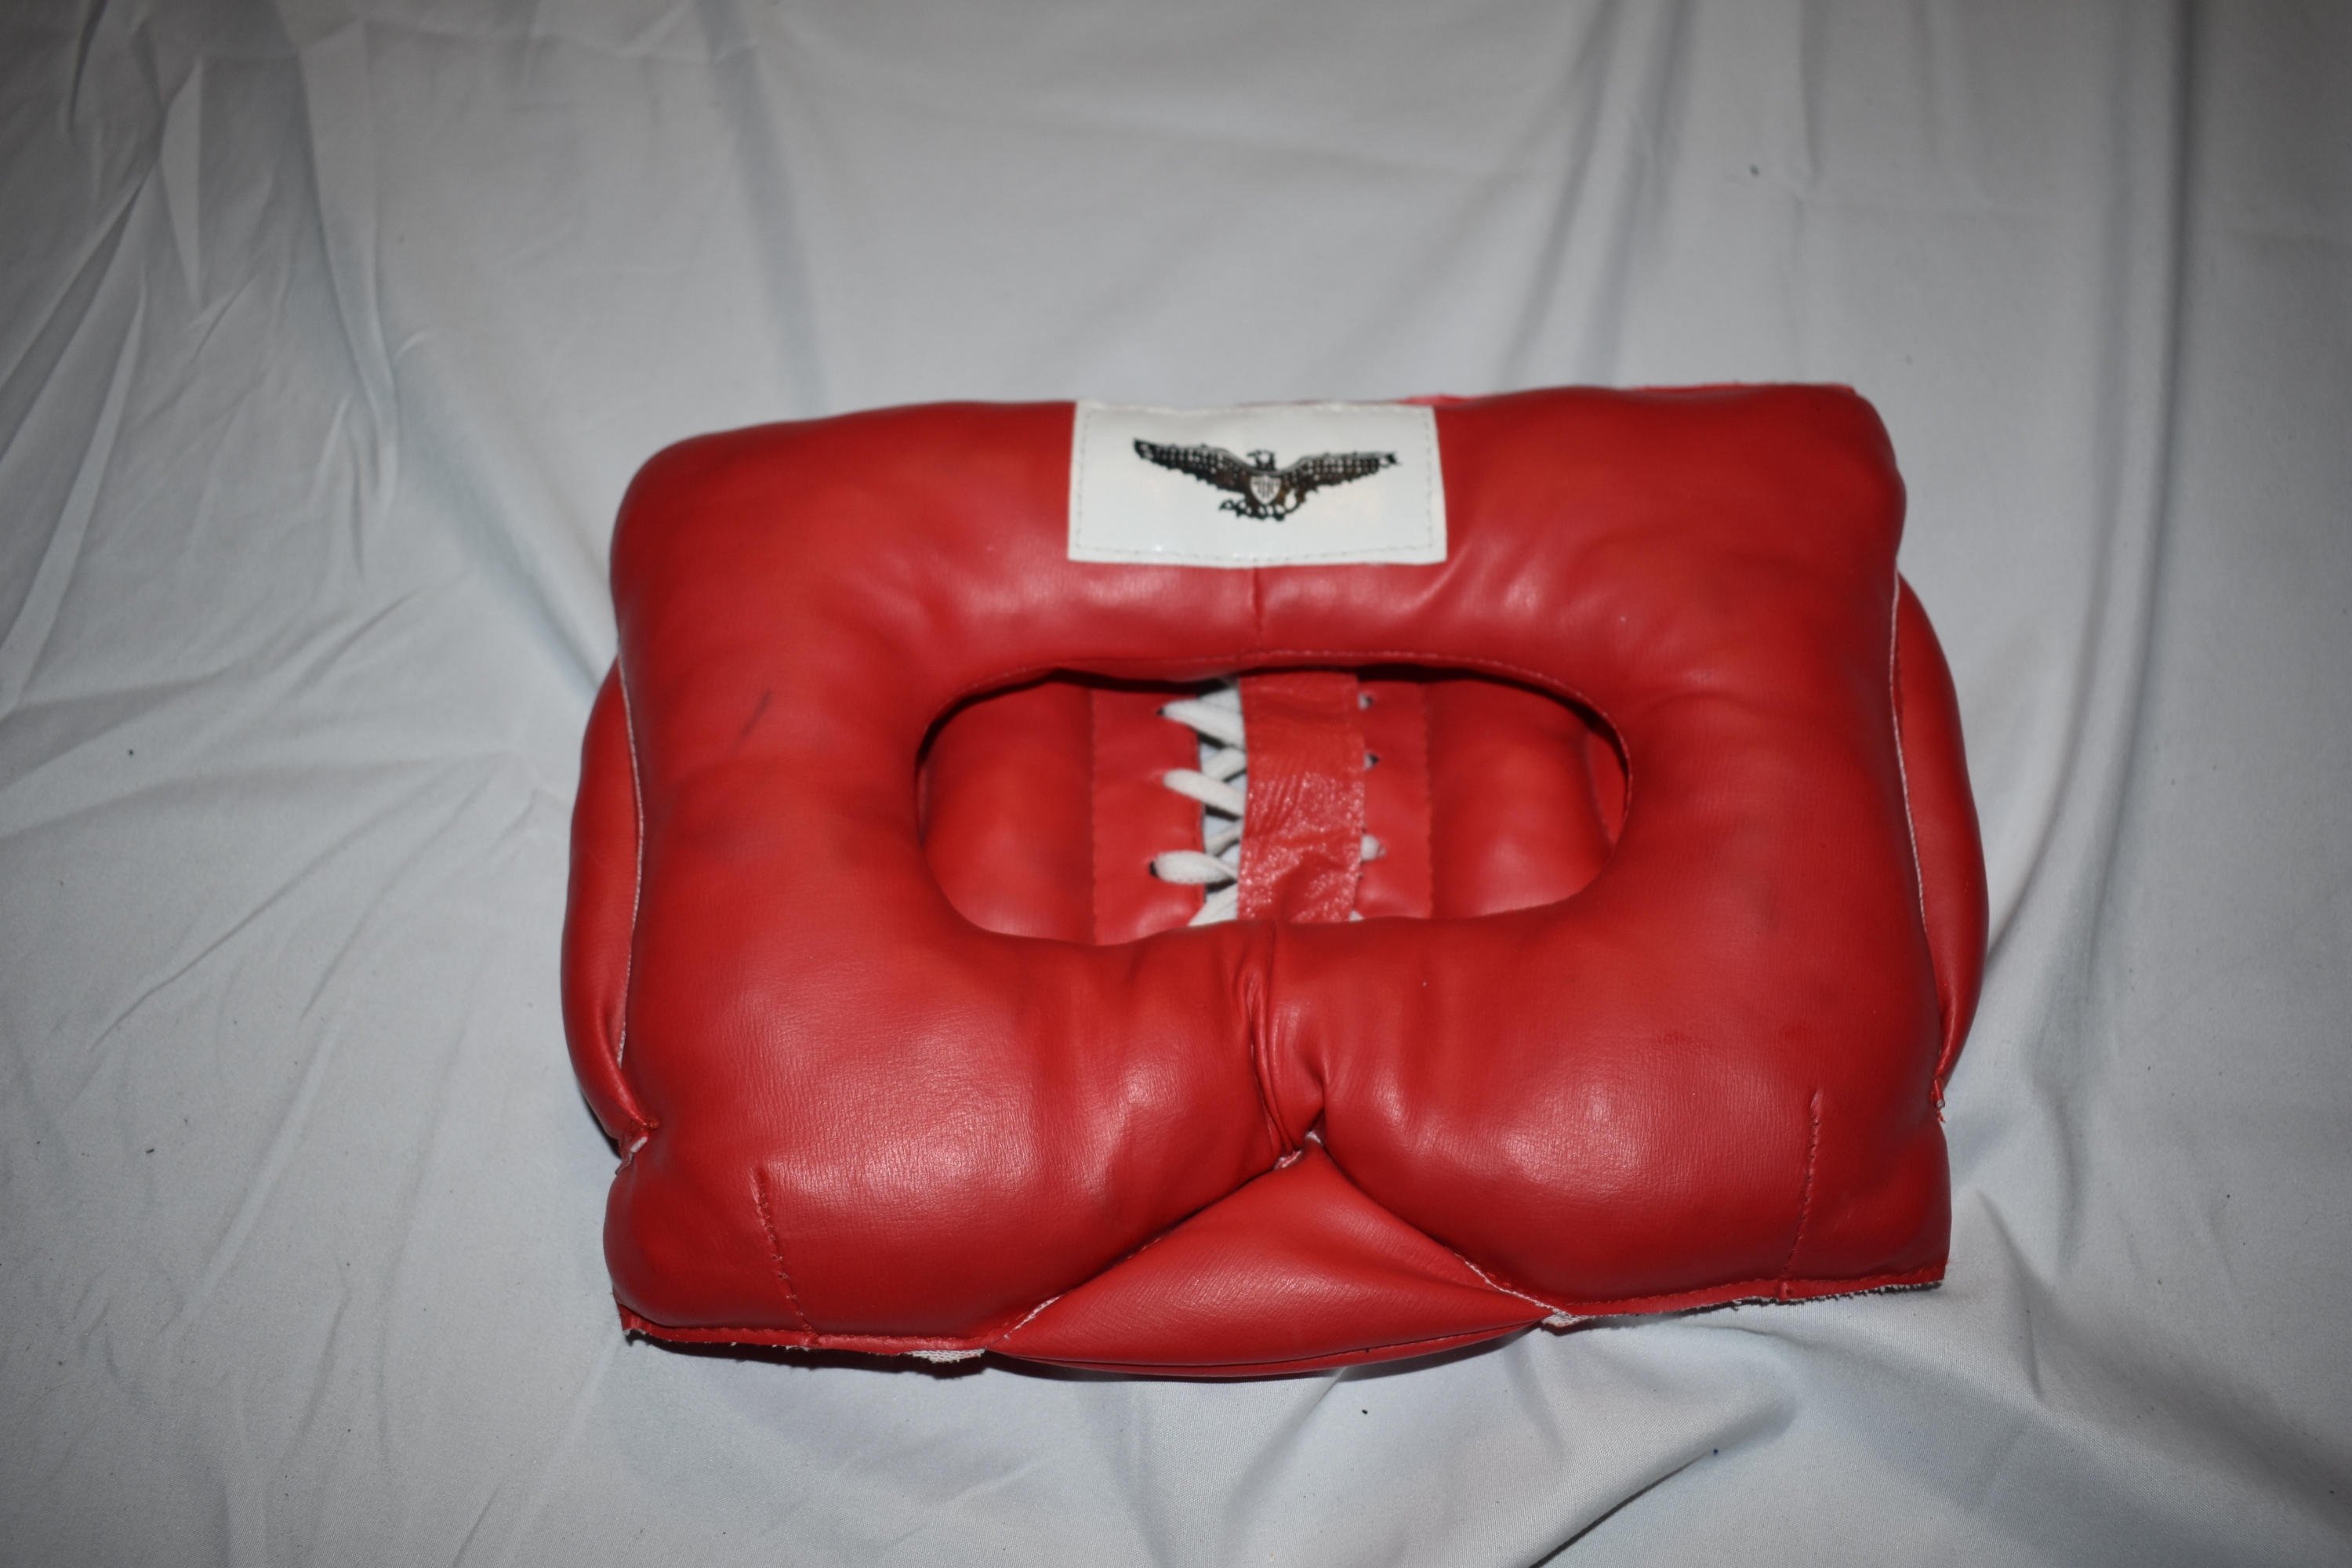 Sparring / MMA / Boxing Head Protection, Red, Large